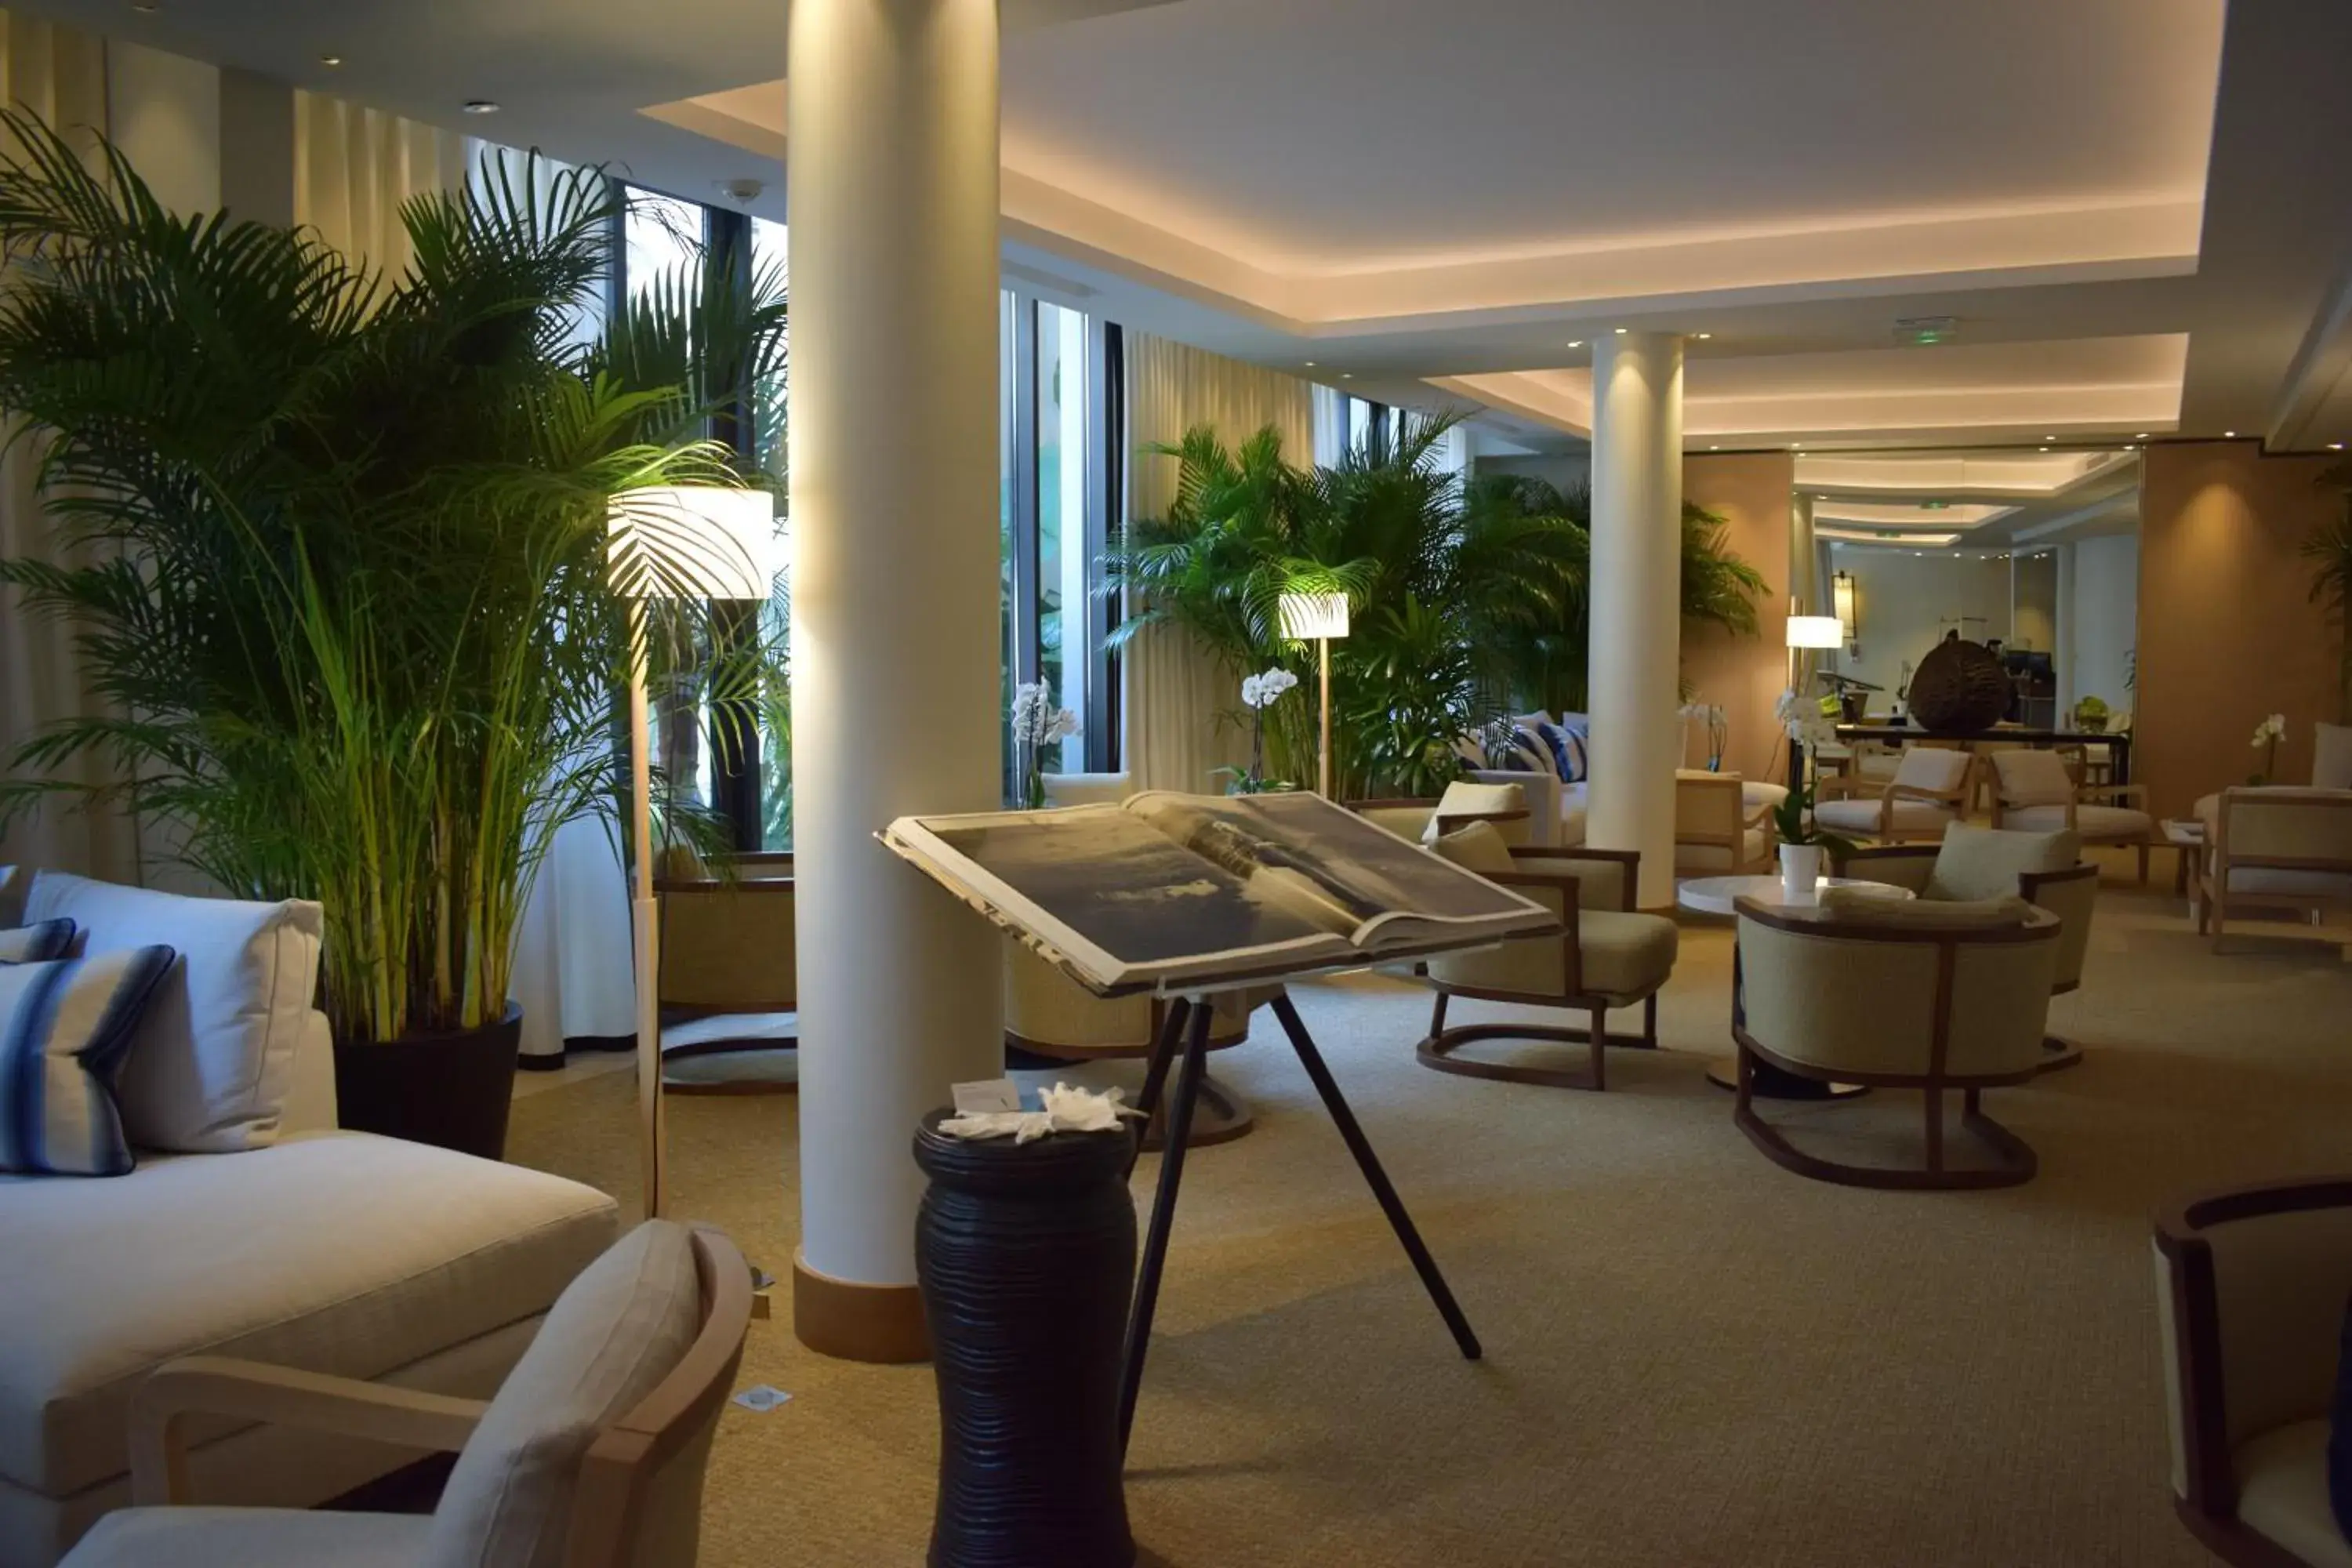 Lobby or reception in Five Seas Hotel Cannes, a Member of Design Hotels